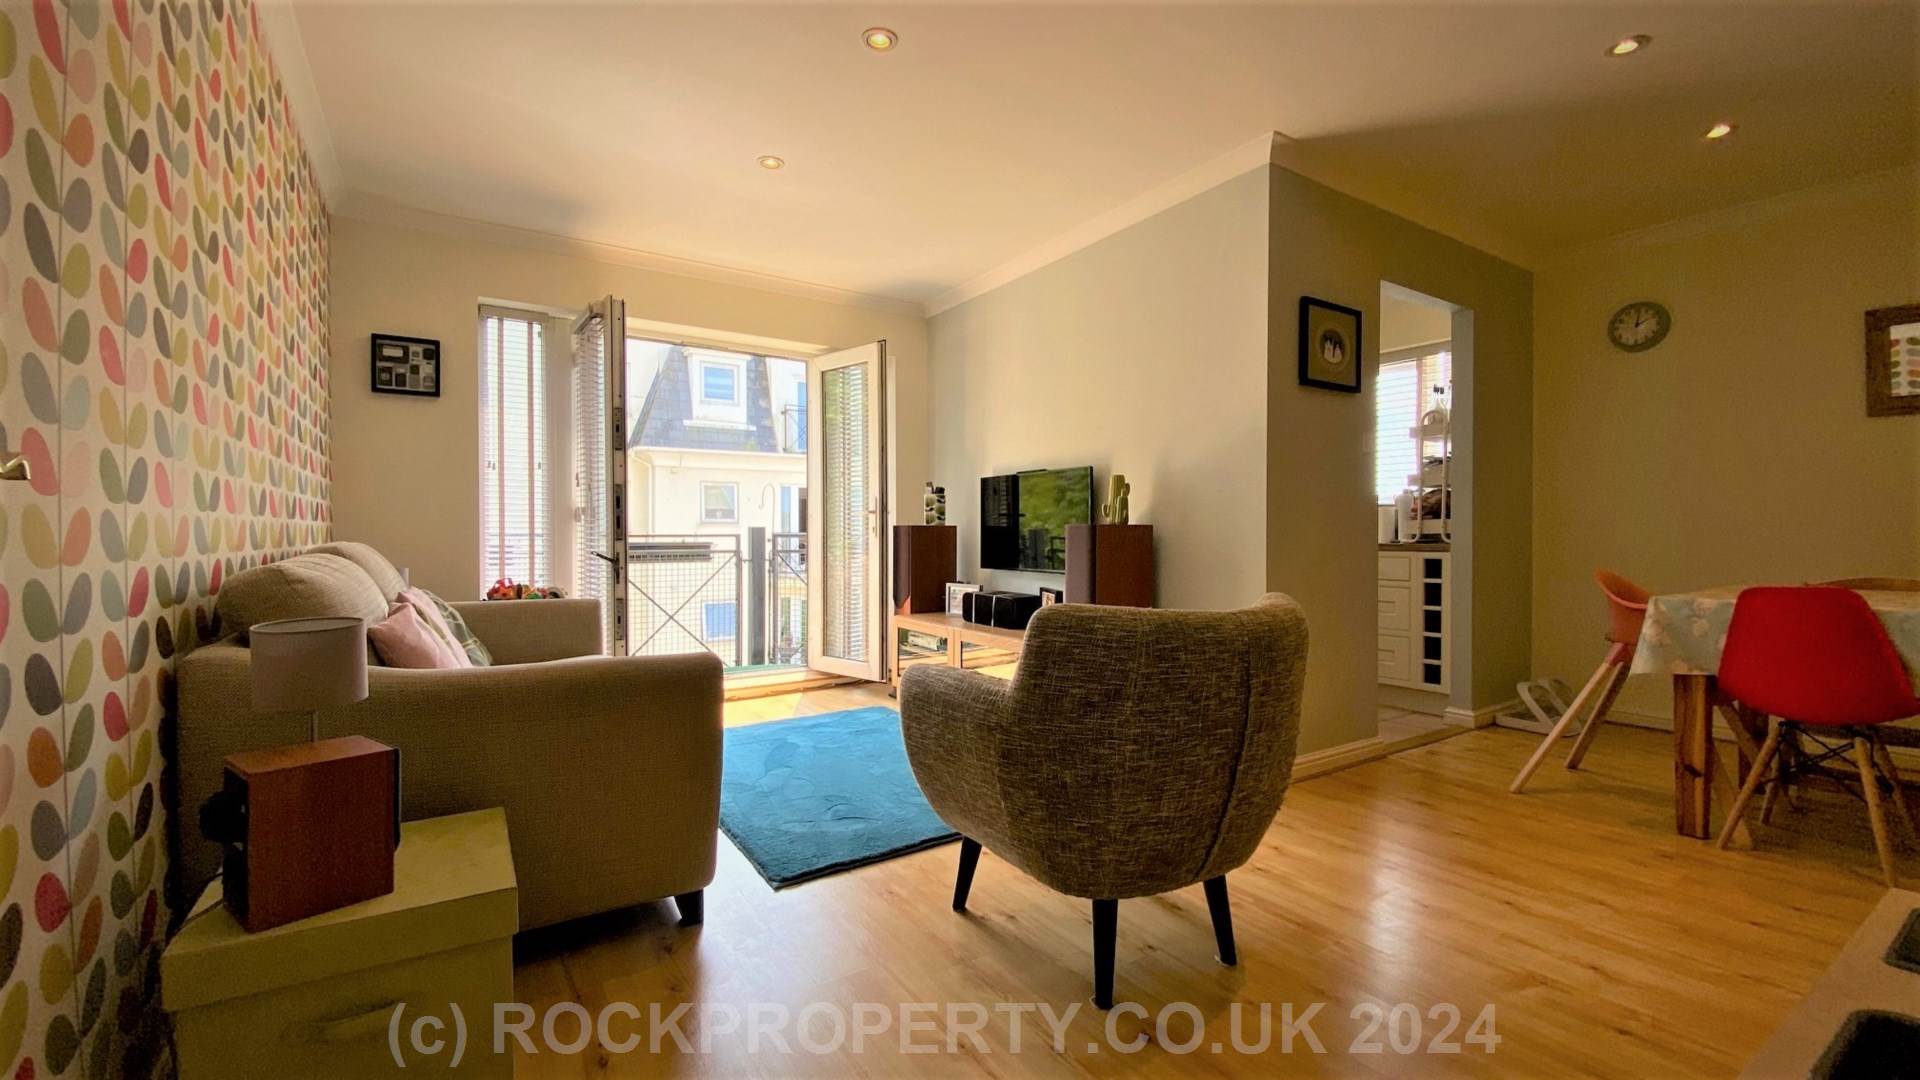 SPACIOUS 2 BED + BALCONY, Woodville Apartments, St Saviour's Road, Image 6